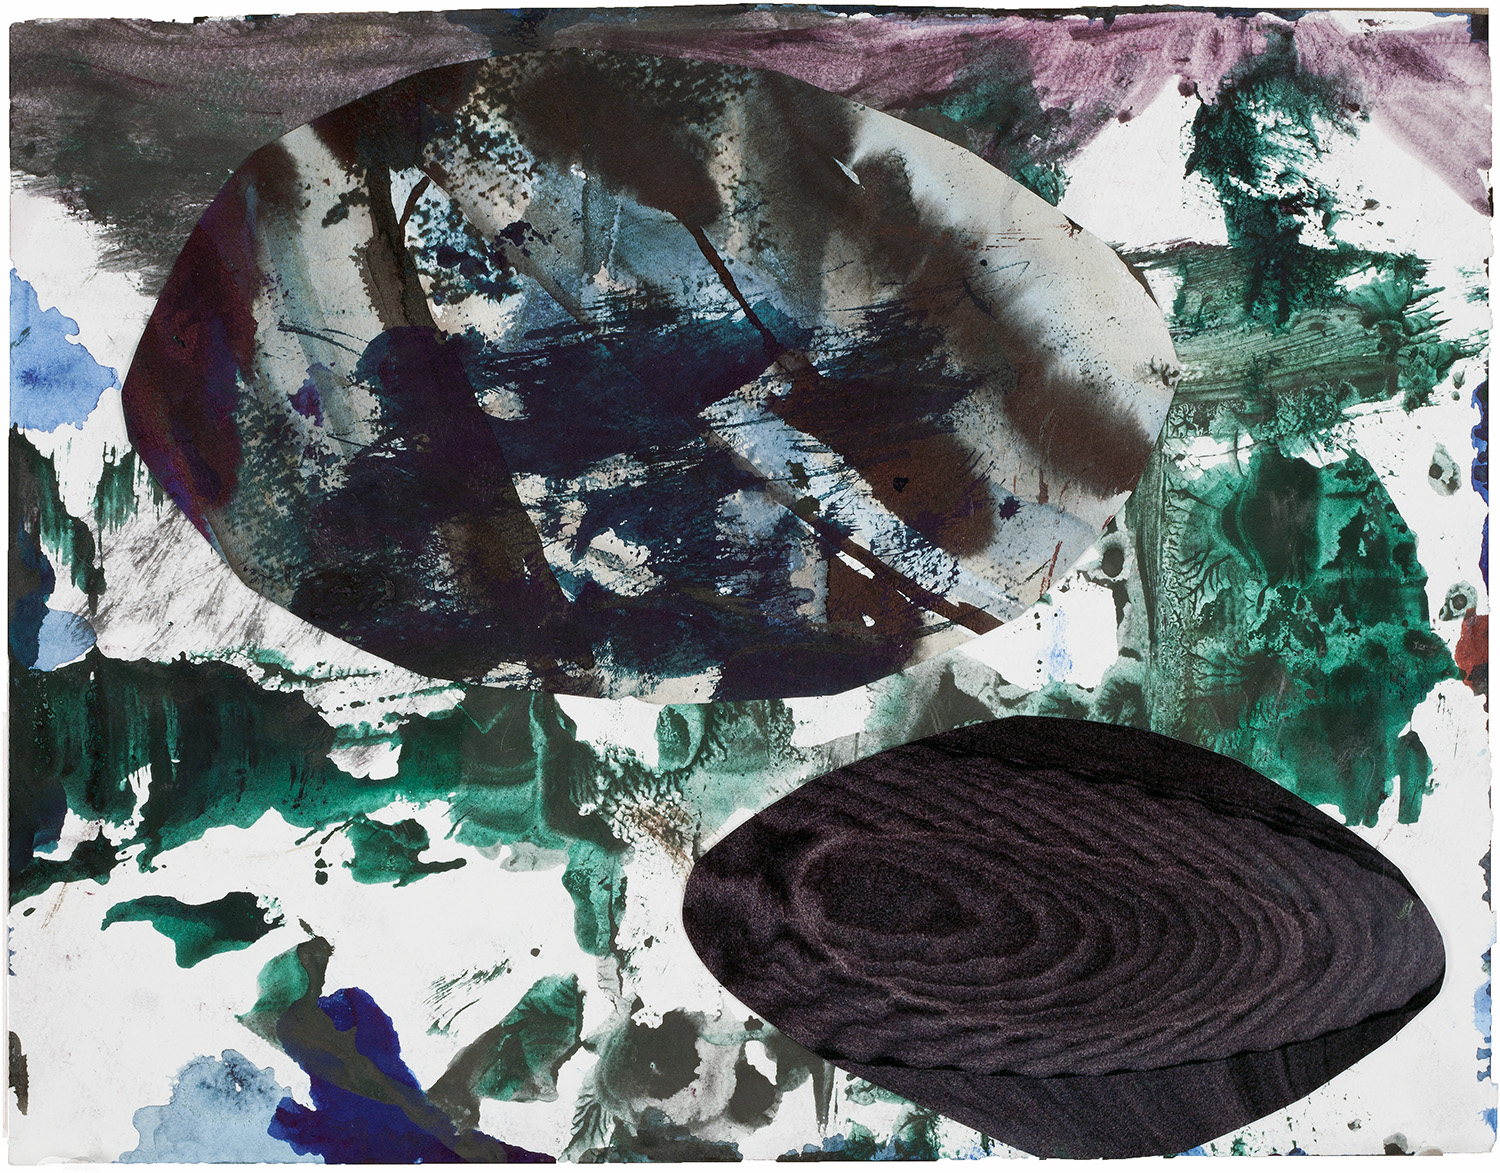  Untitled (Post-Antarctic 2B), 2011, watercolor, inkjet print and collage on paper, 11 x 14 inches 